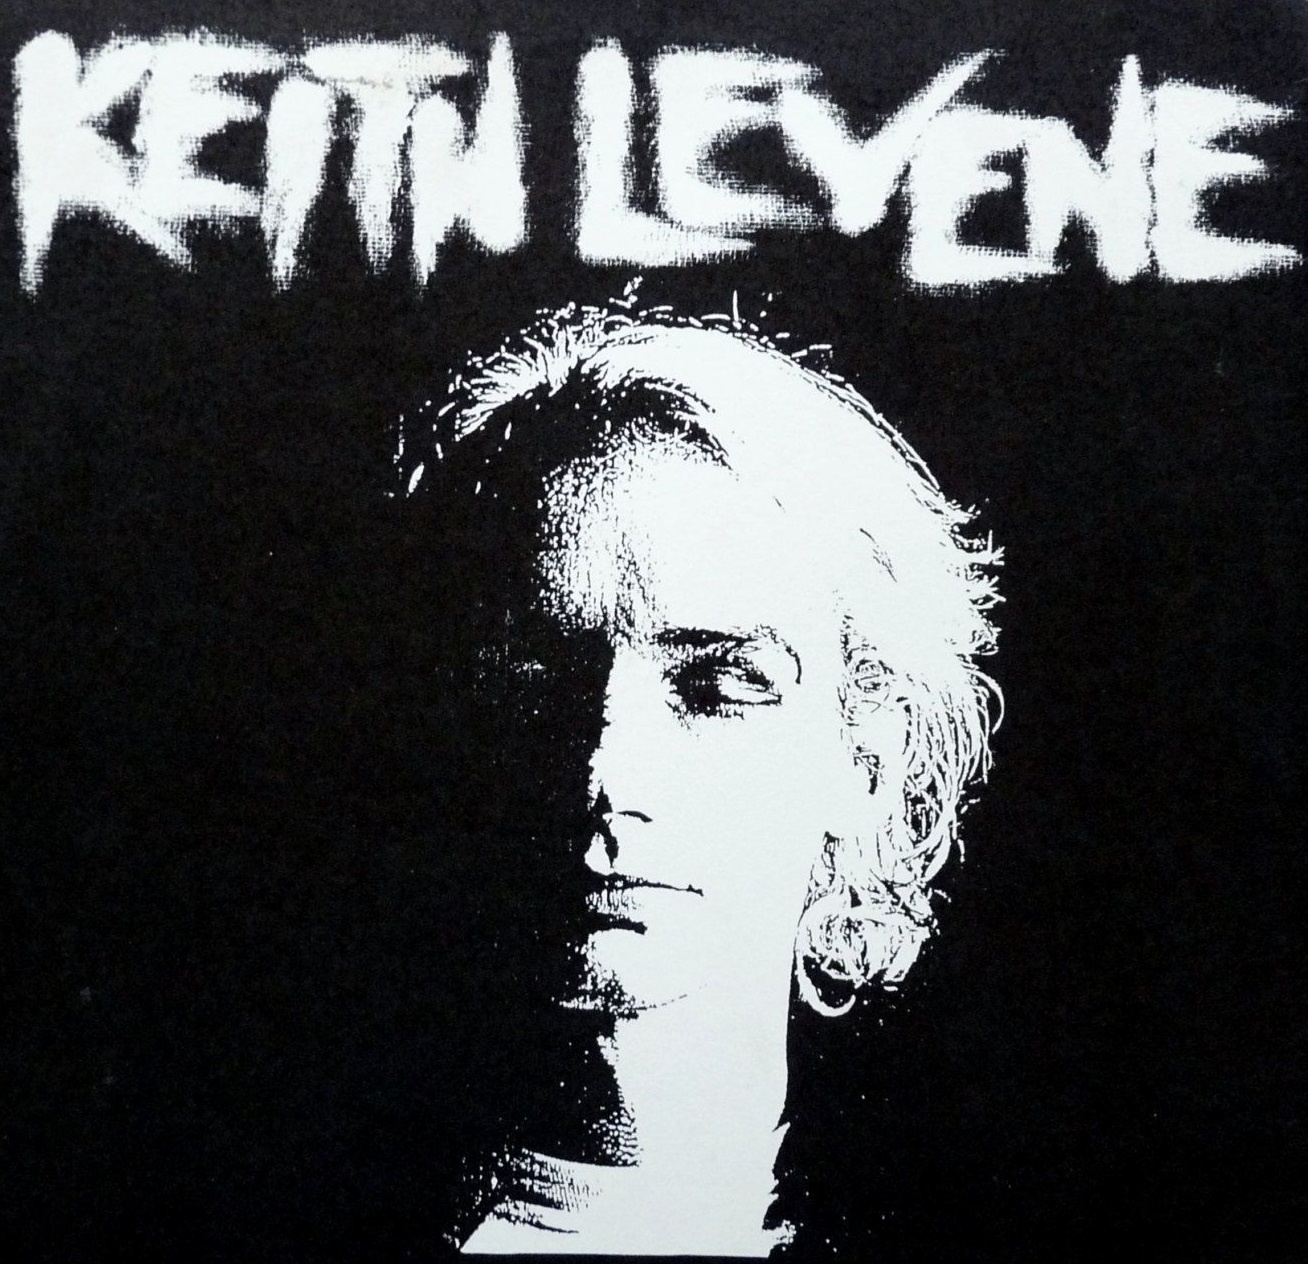 Keith Levene Founding Member Of The Clash And Public Image Ltd Dead At 65